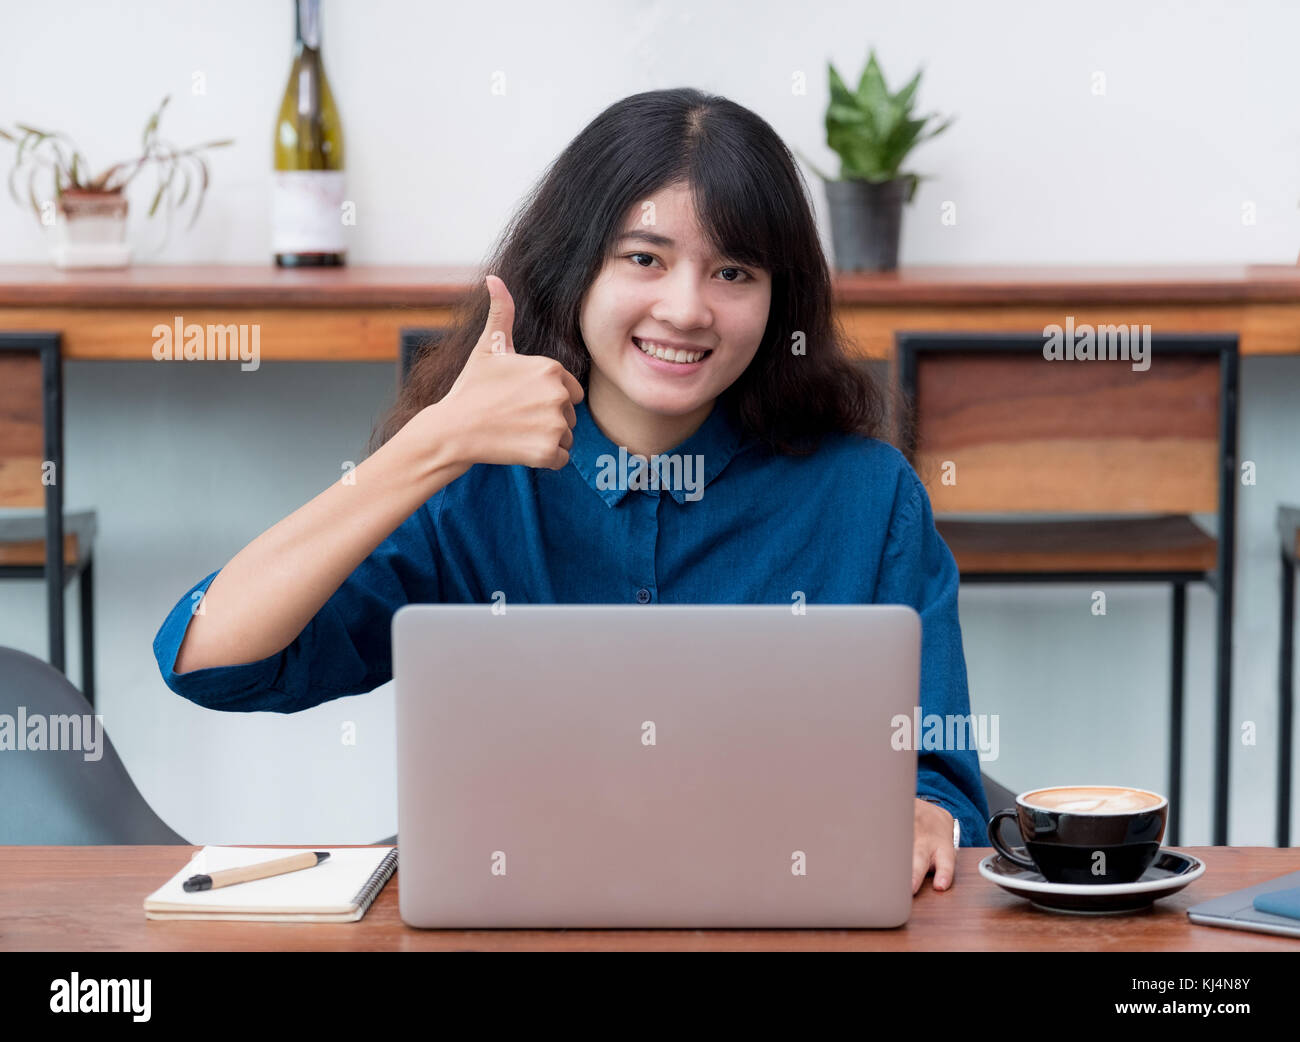 Asia woman freelancer thumbs up and smile using laptop with coffee cup in cafe restaurant,woman working outside office,digital lifestyle concept Stock Photo